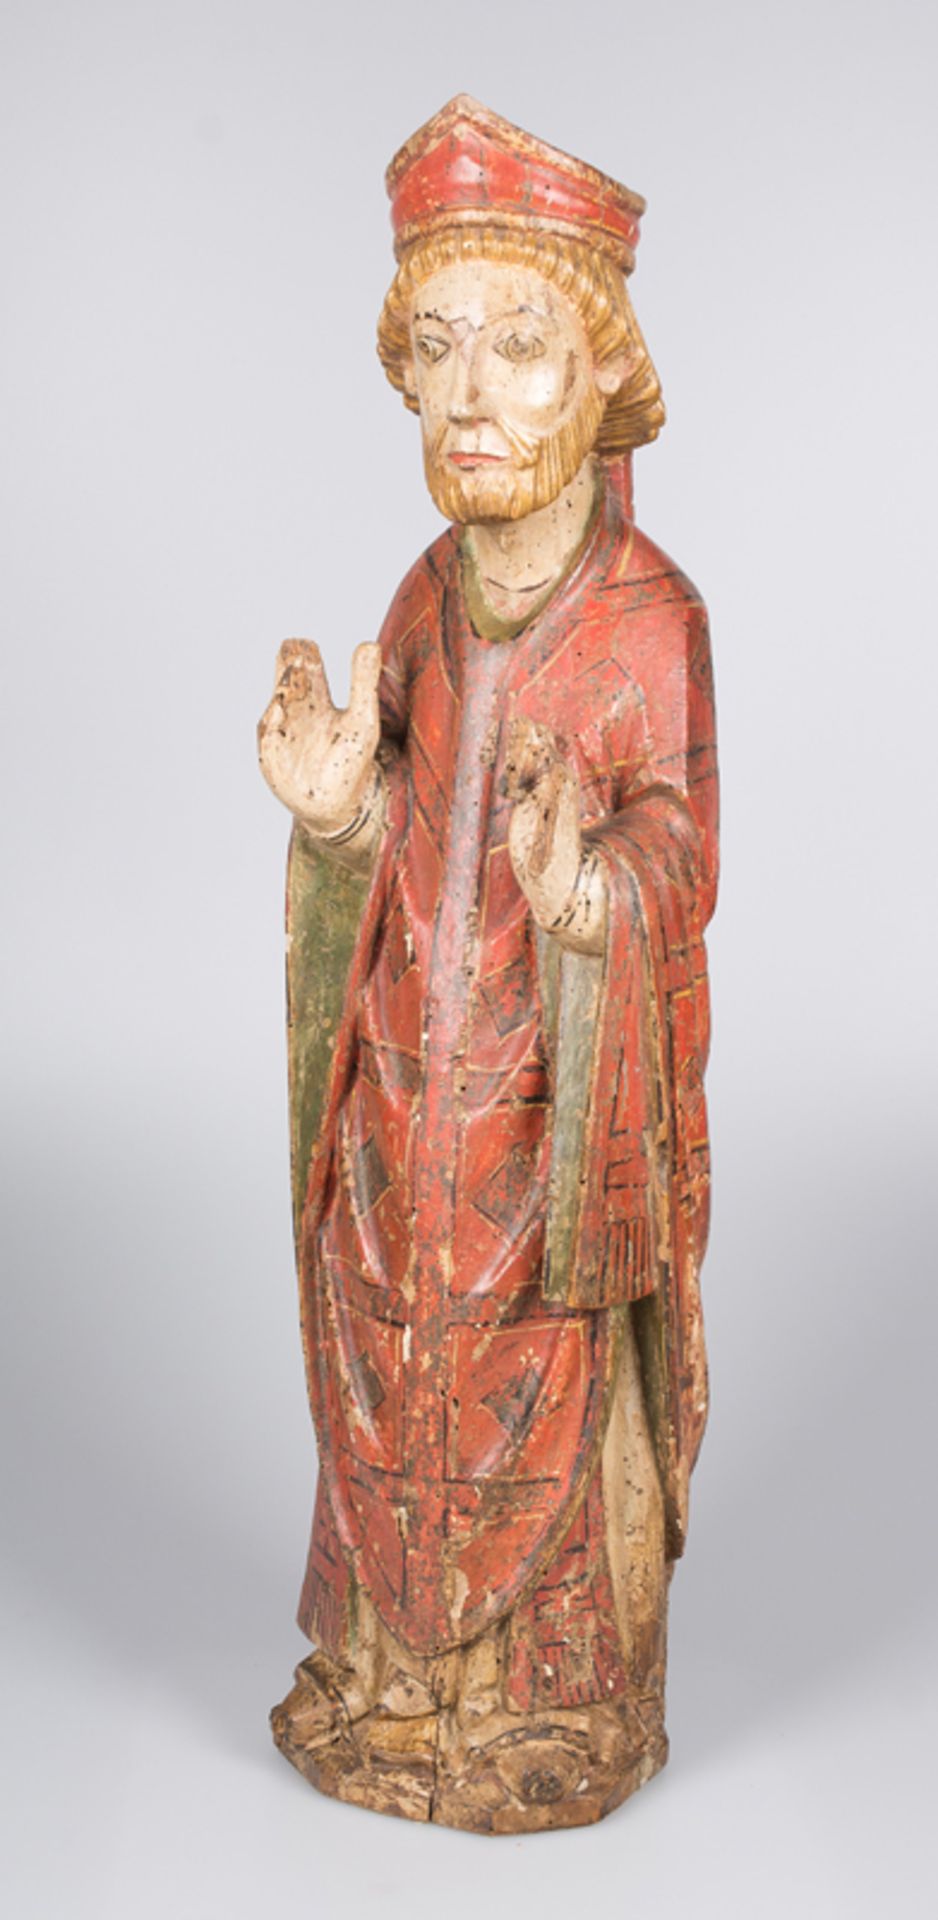 “Saint Augustine". Carved, gilded and polychromed sculpture. Romanesque. CIrca 1300. - Image 4 of 7